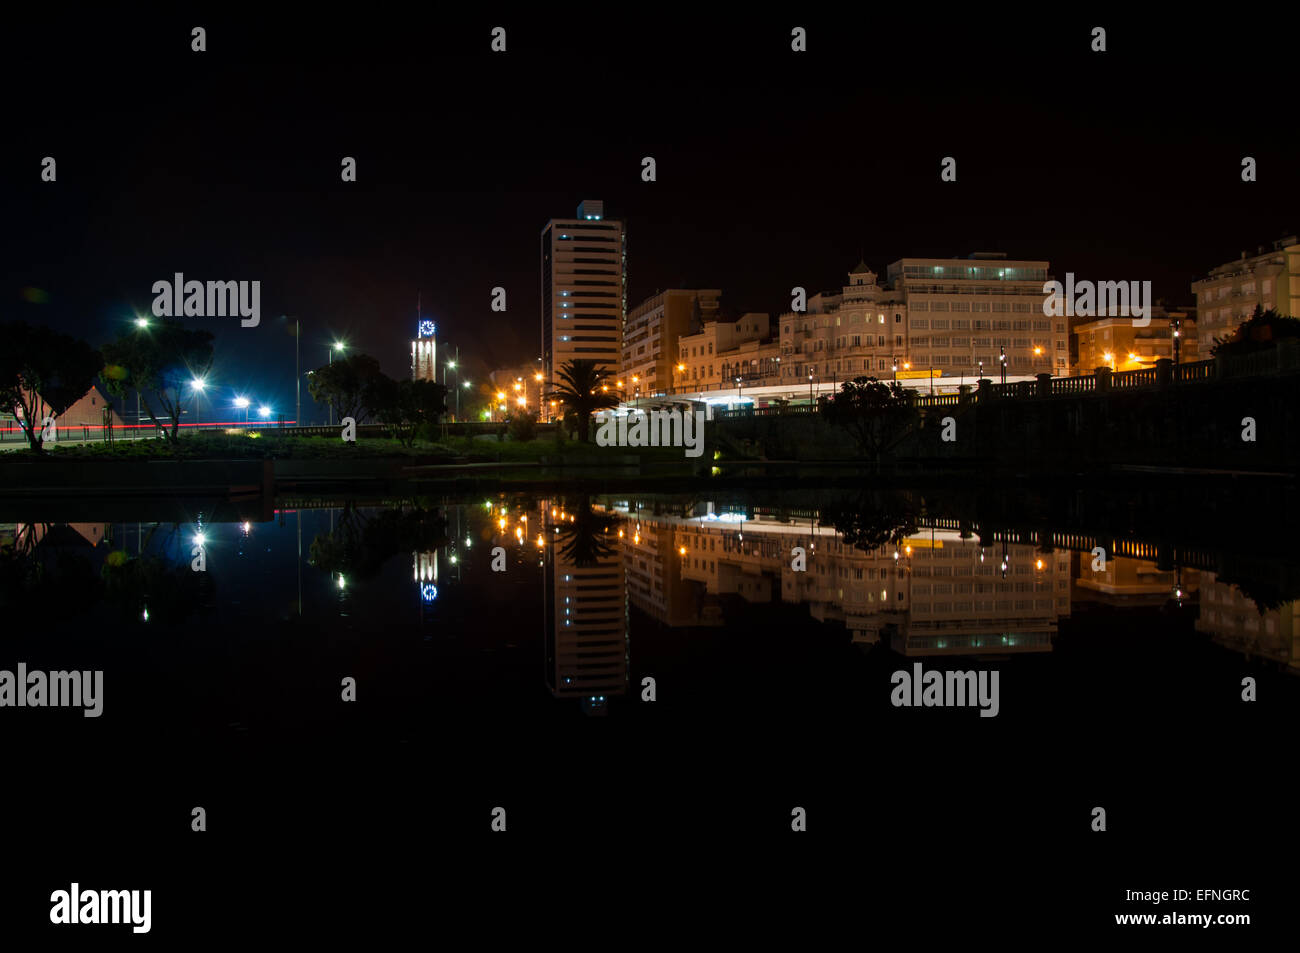 Buildings reflected in a water mirror at night in Figueira da Foz, Portugal Stock Photo